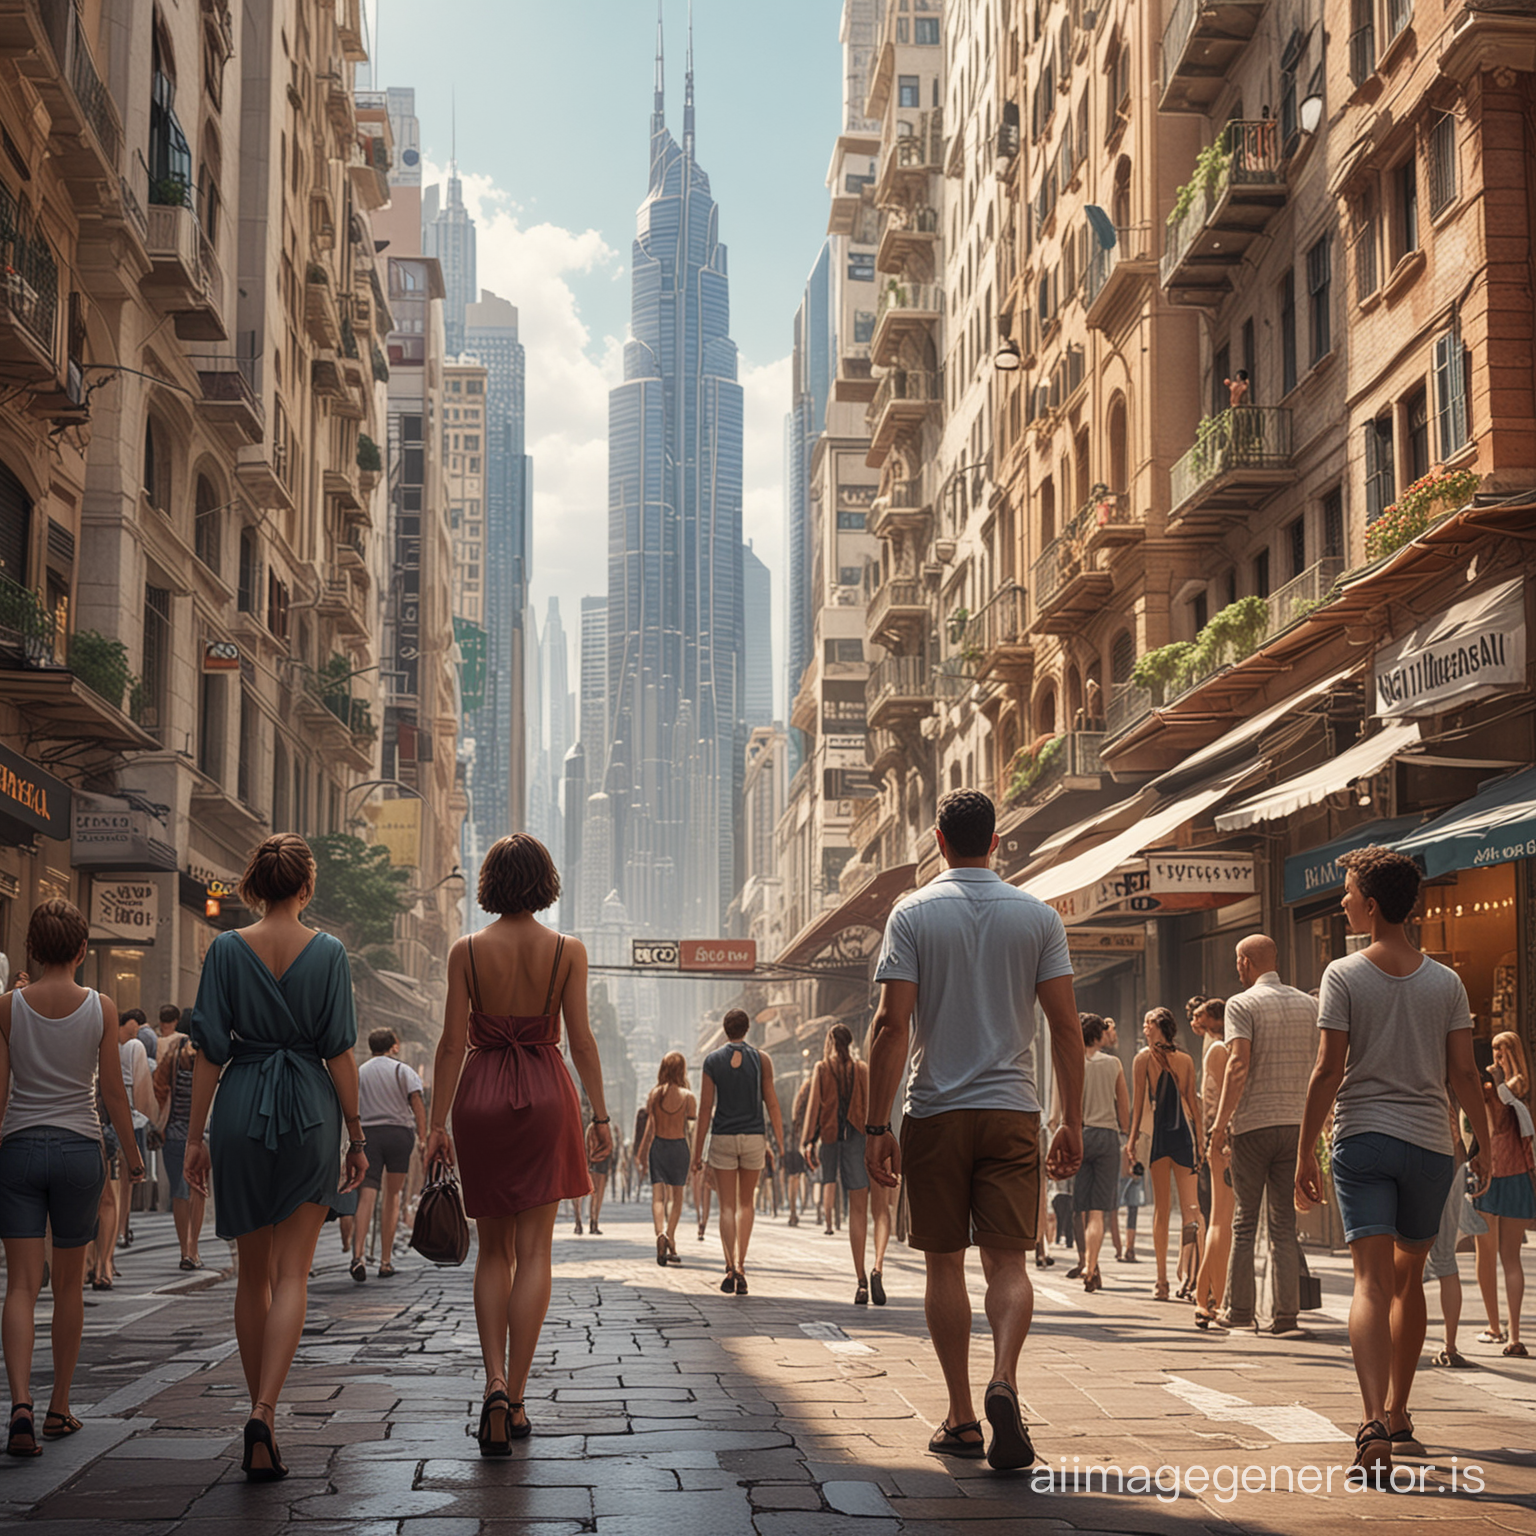 mediterranean city midtown up close with skyscrapers, realistic humans and fashionable clothes
